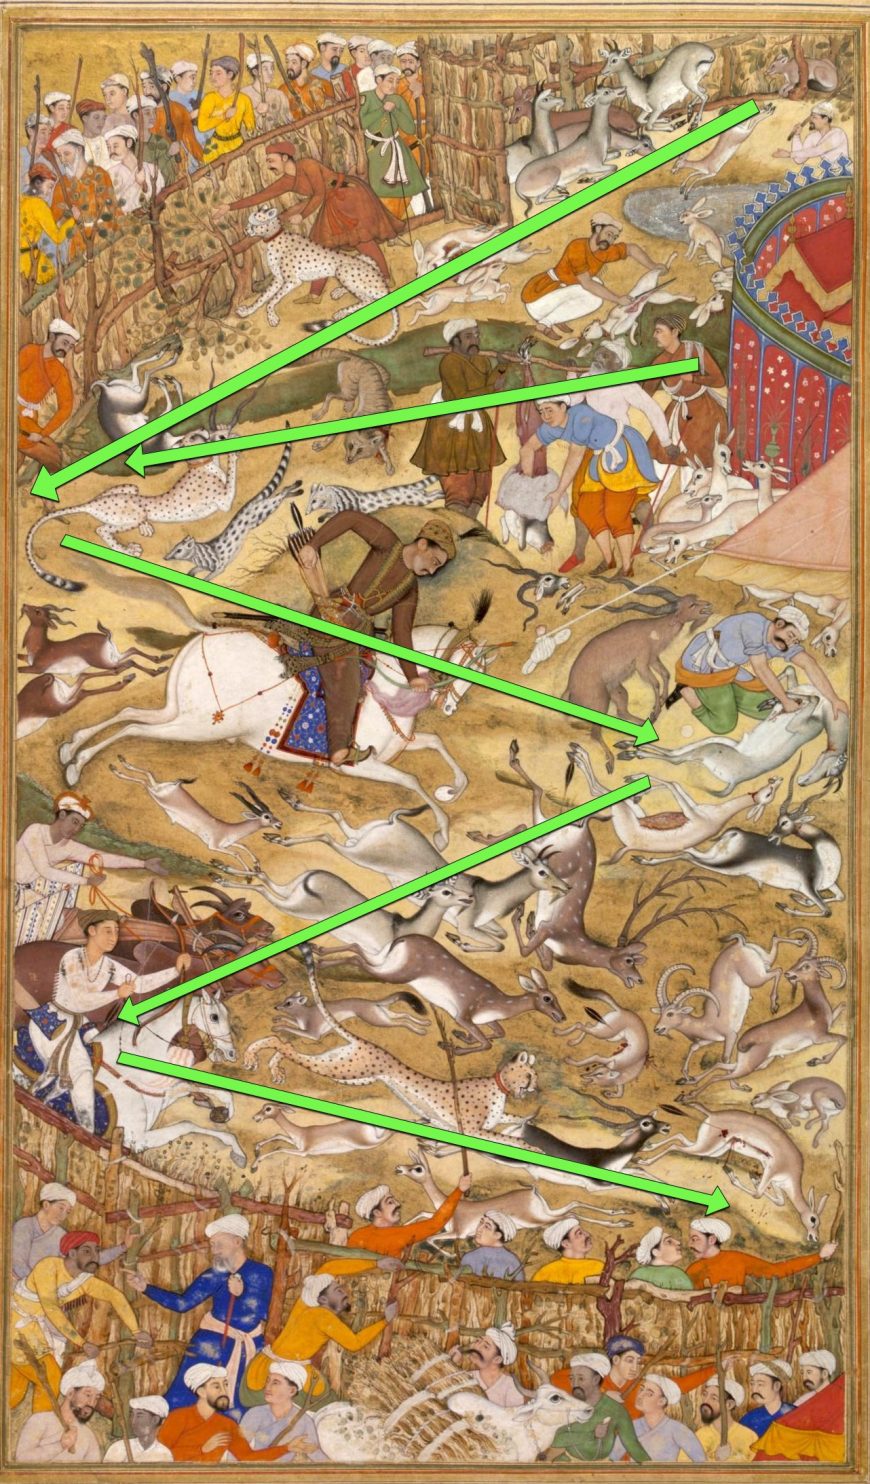 Akbar on horseback, hunting animals within an enclosure, illustration from the Akbarnama, c. 1590-95, Mughal Empire, India, opaque watercolor and gold on paper, 32.1 x 18.8 cm (Victoria and Albert Museum, London)